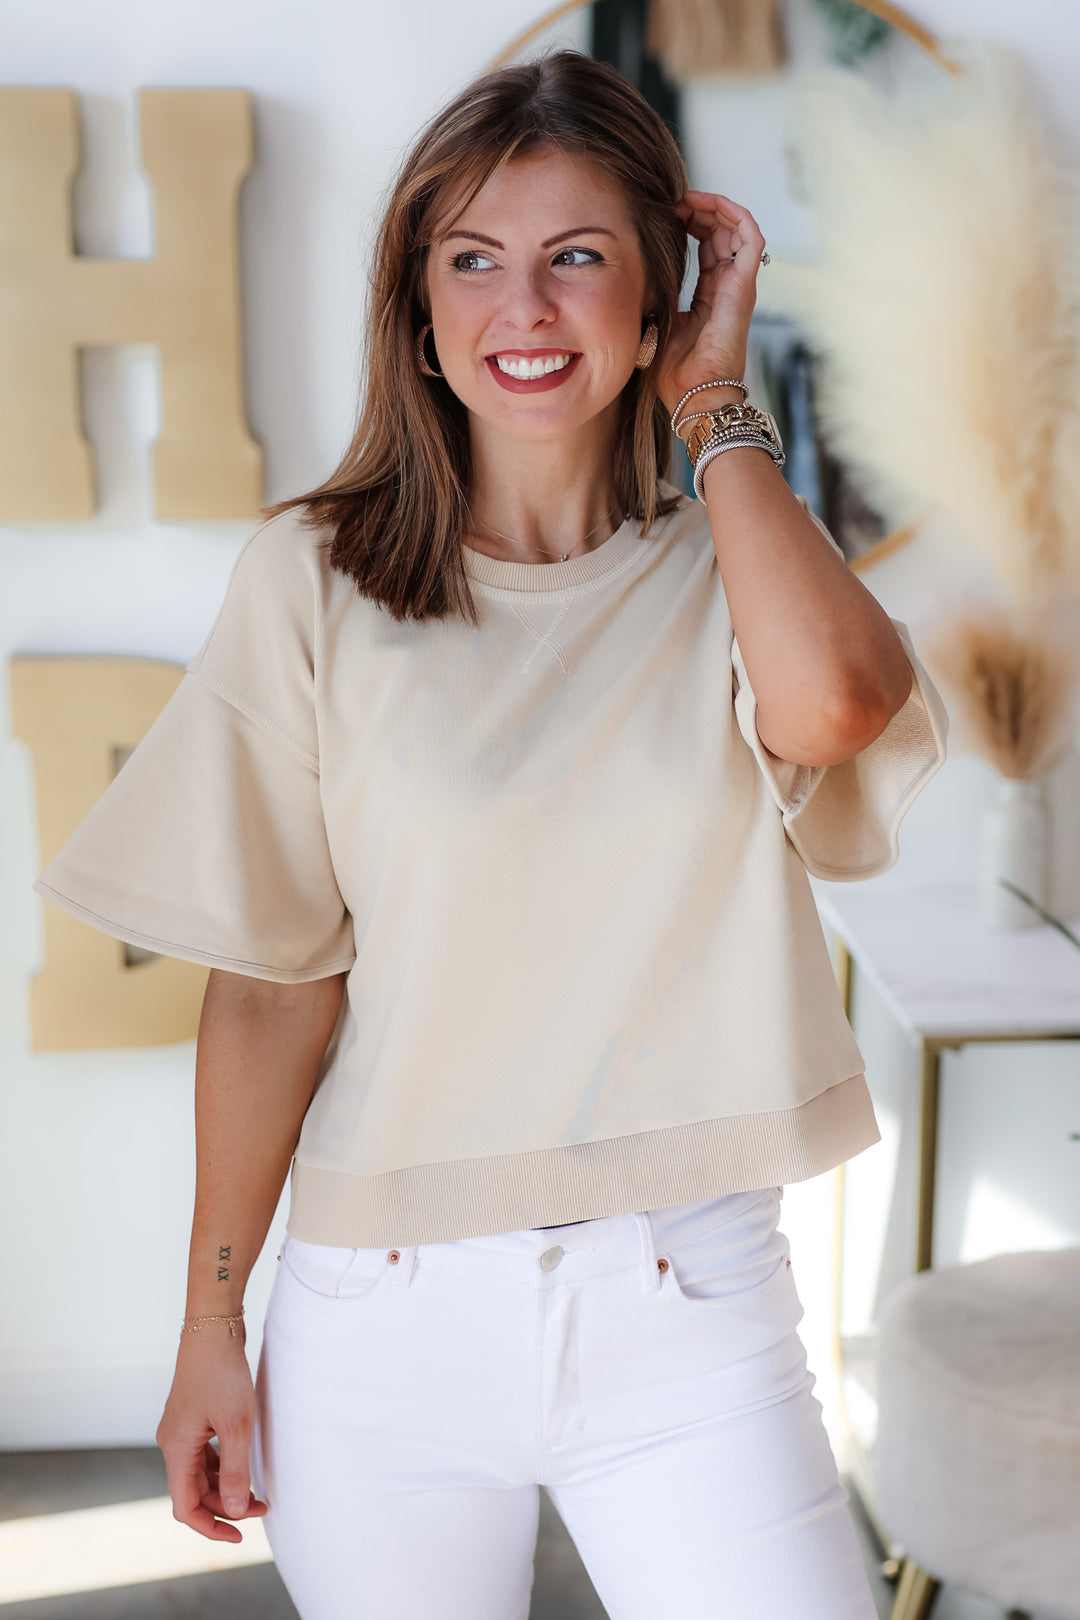 A brunette woman standing in a shop wearing a tan colored short sleeve shirt with wide sleeve and white jeans.